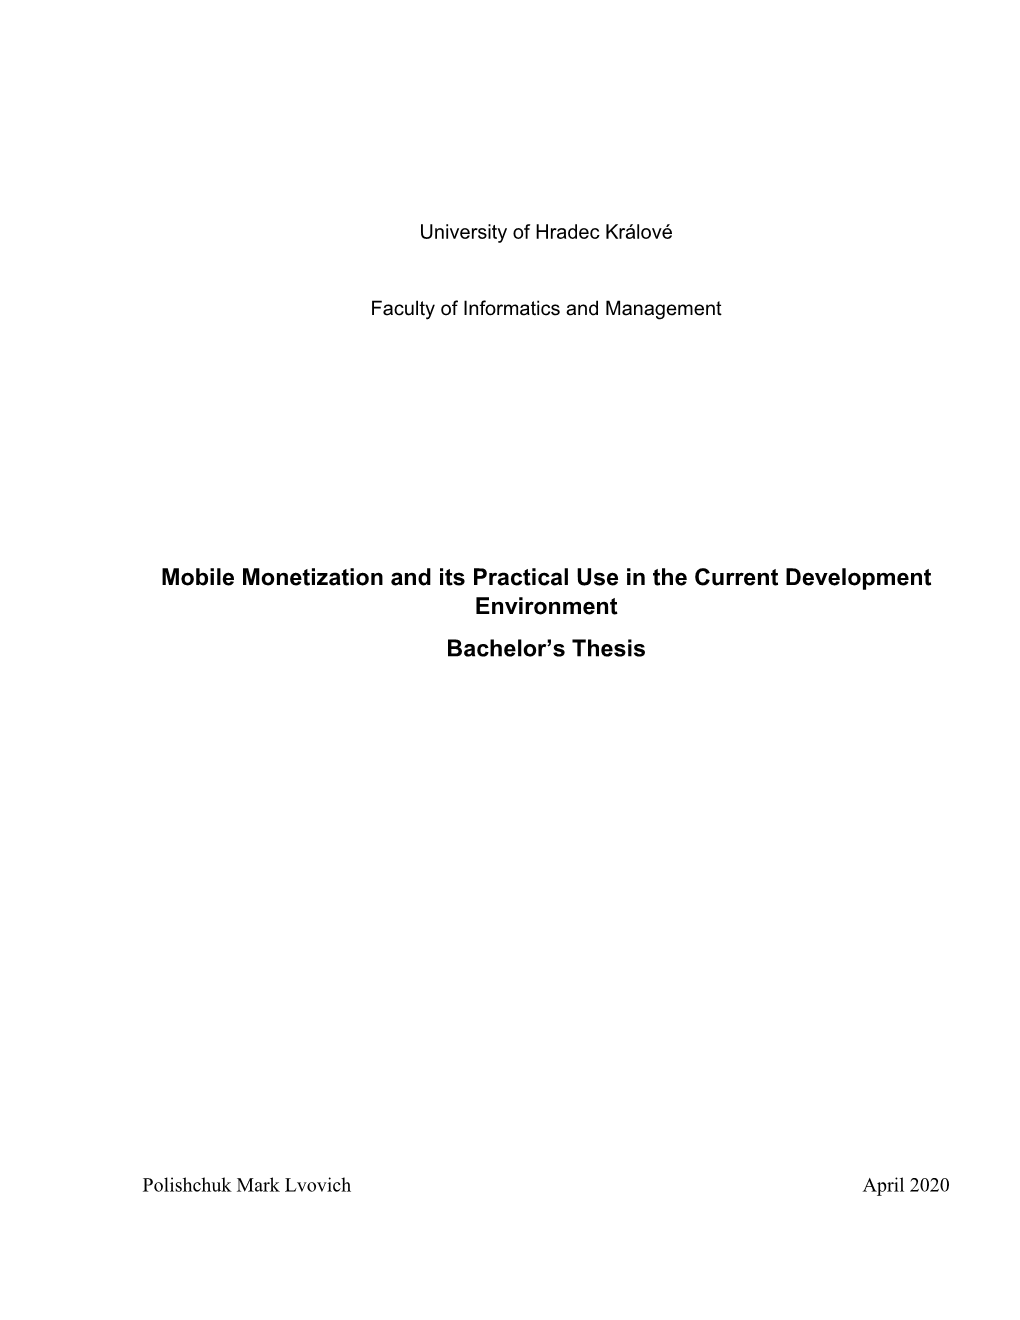 Mobile Monetization and Its Practical Use in the Current Development Environment Bachelor's Thesis